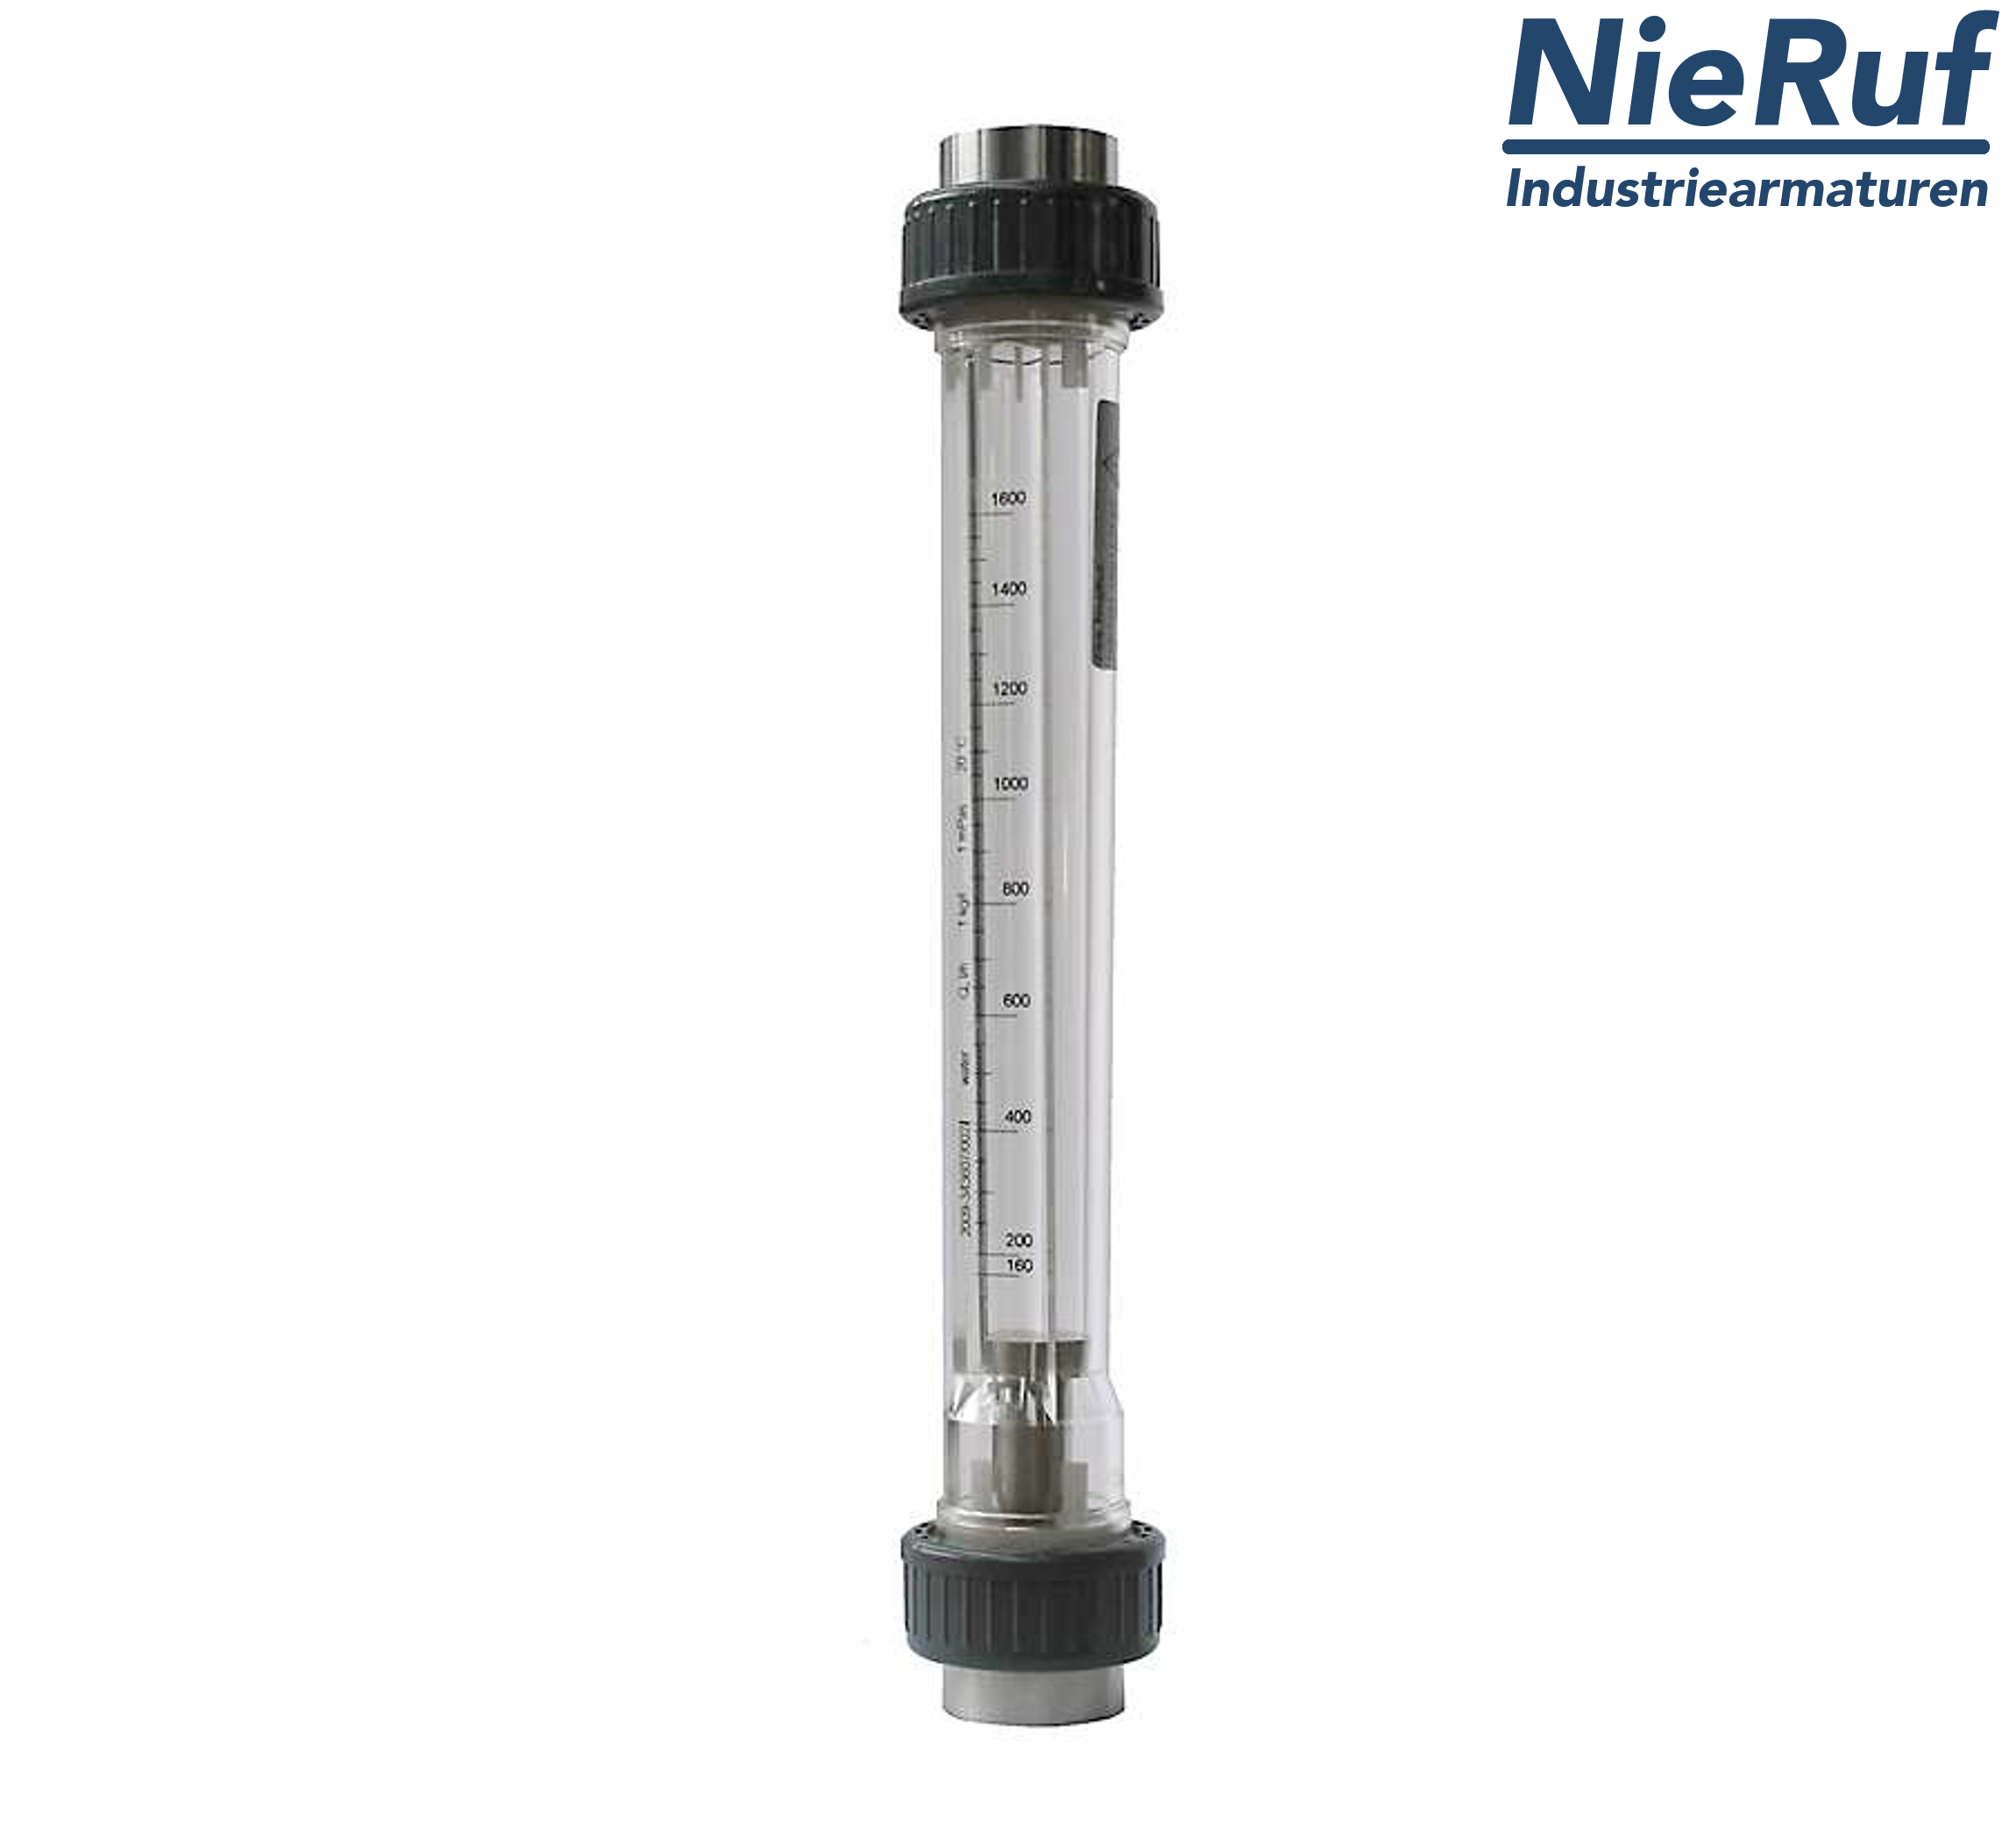 Variable area flowmeter 3/4" inch 160.0 - 1600 l/h water NBR